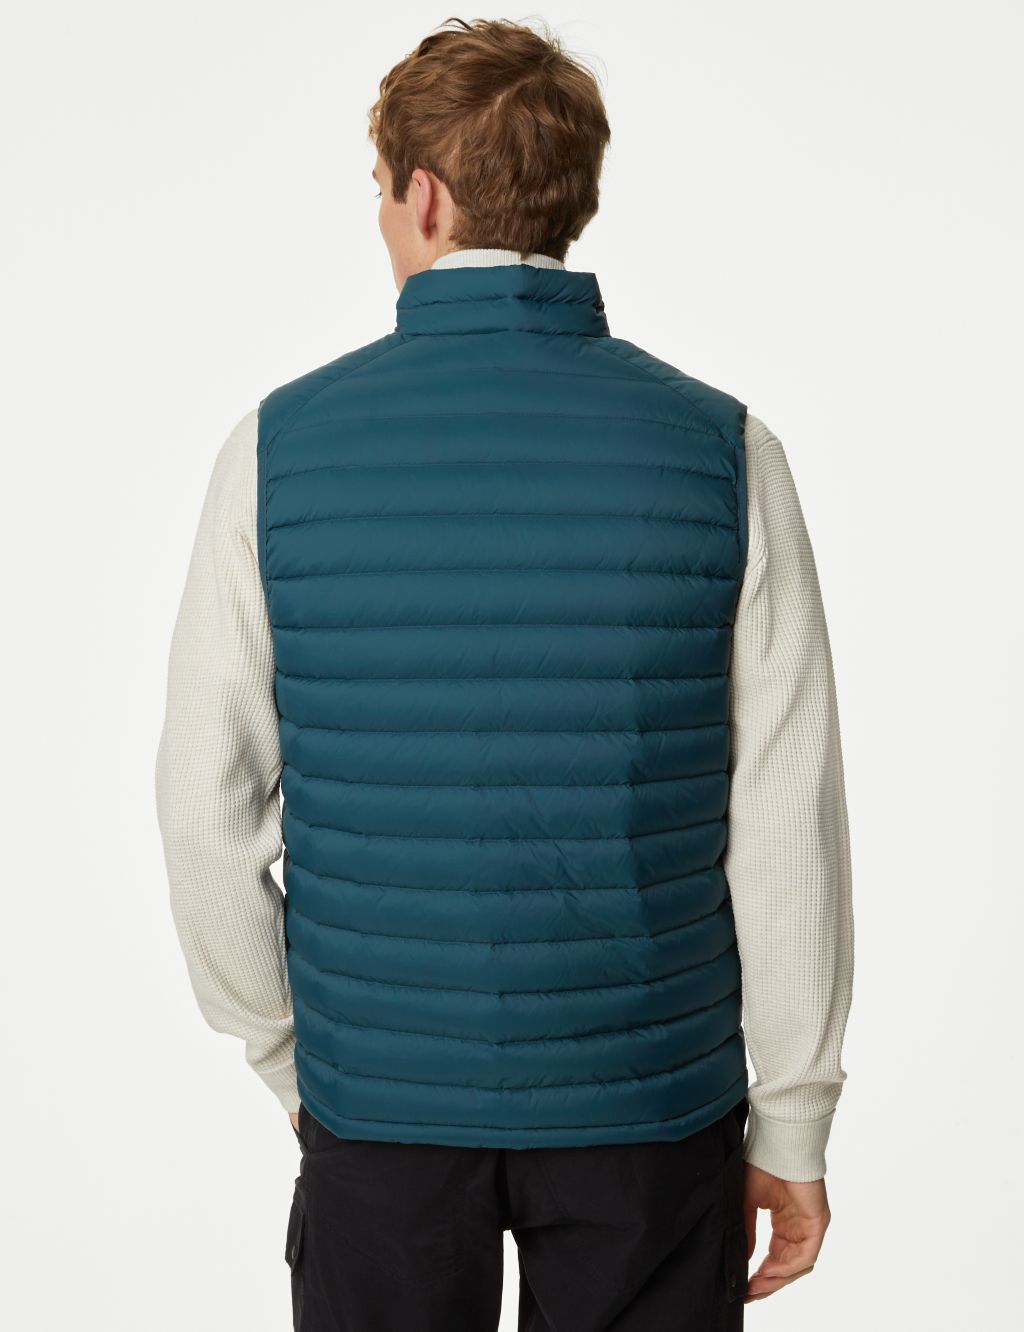 Feather and Down Gilet with Stormwear™ image 5